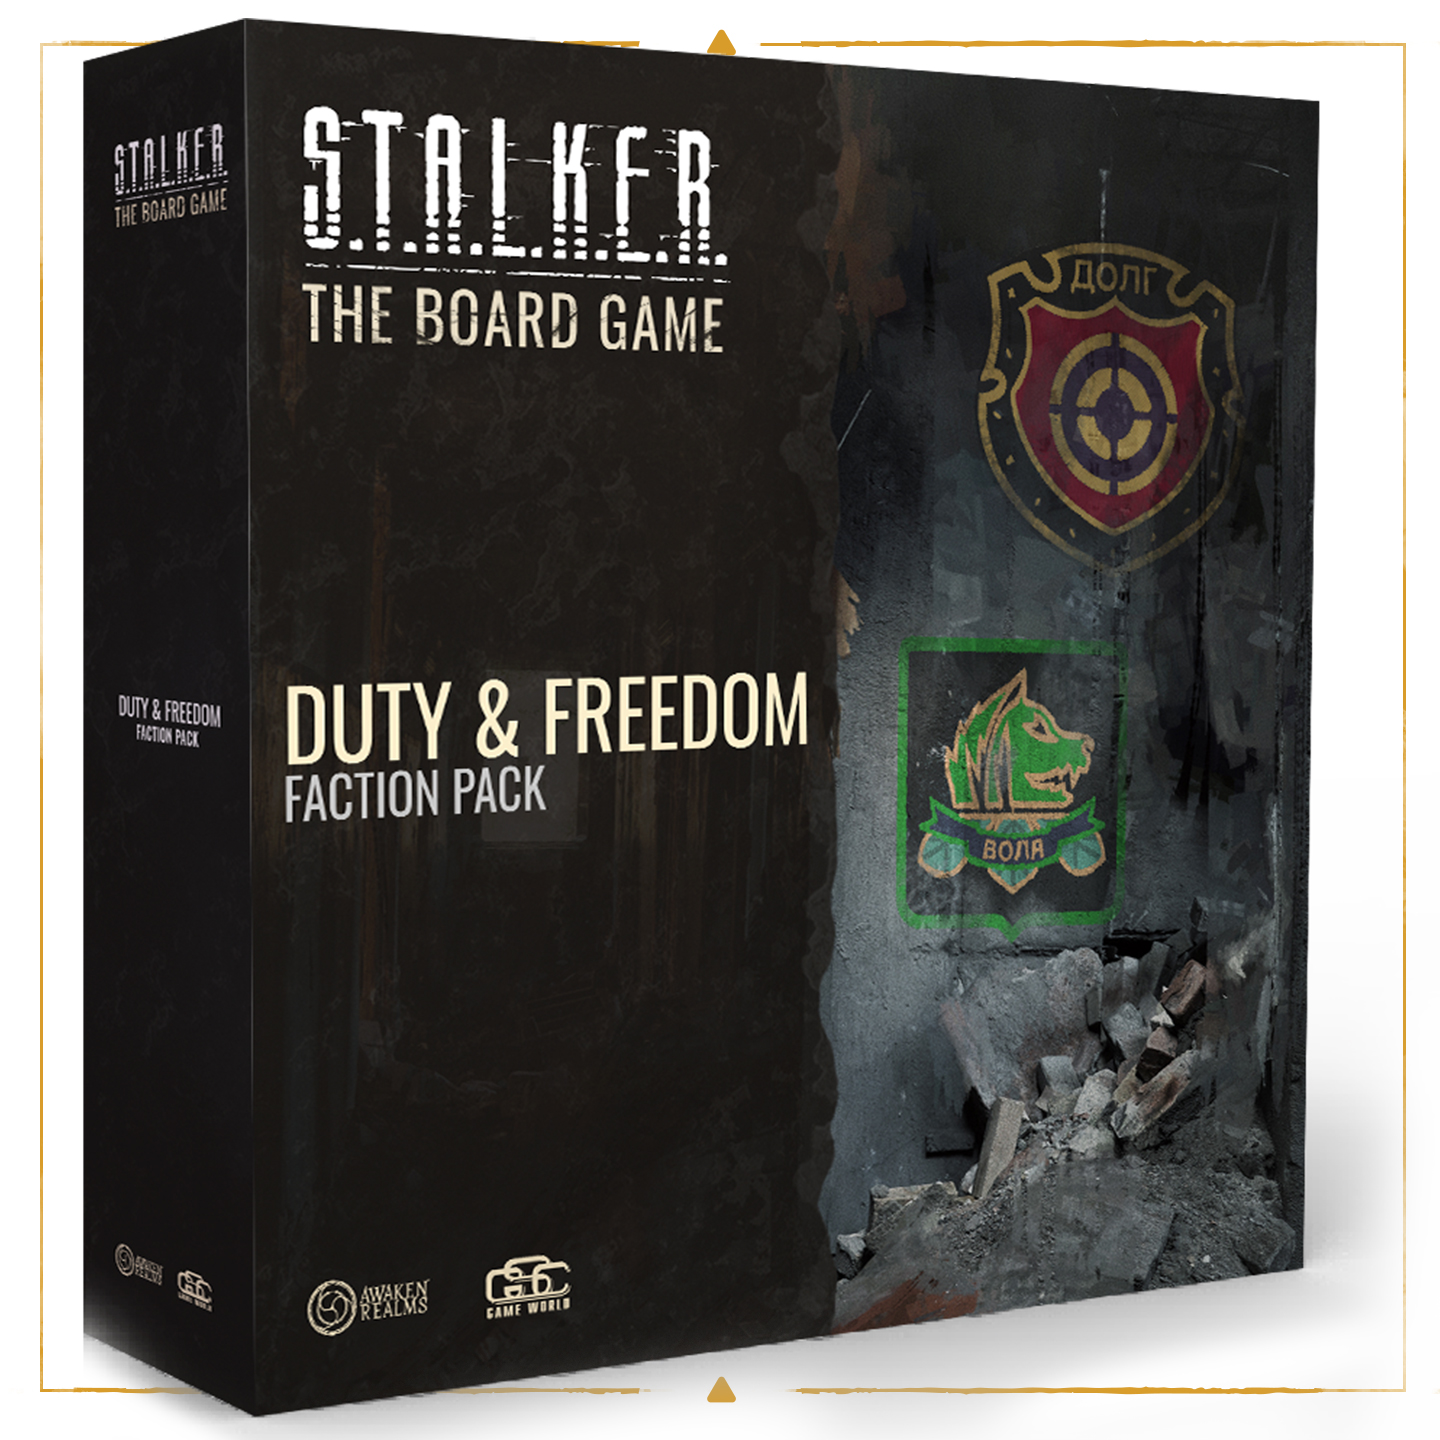 In just 15 minutes, the first playable Stalker 2 demo gave me all